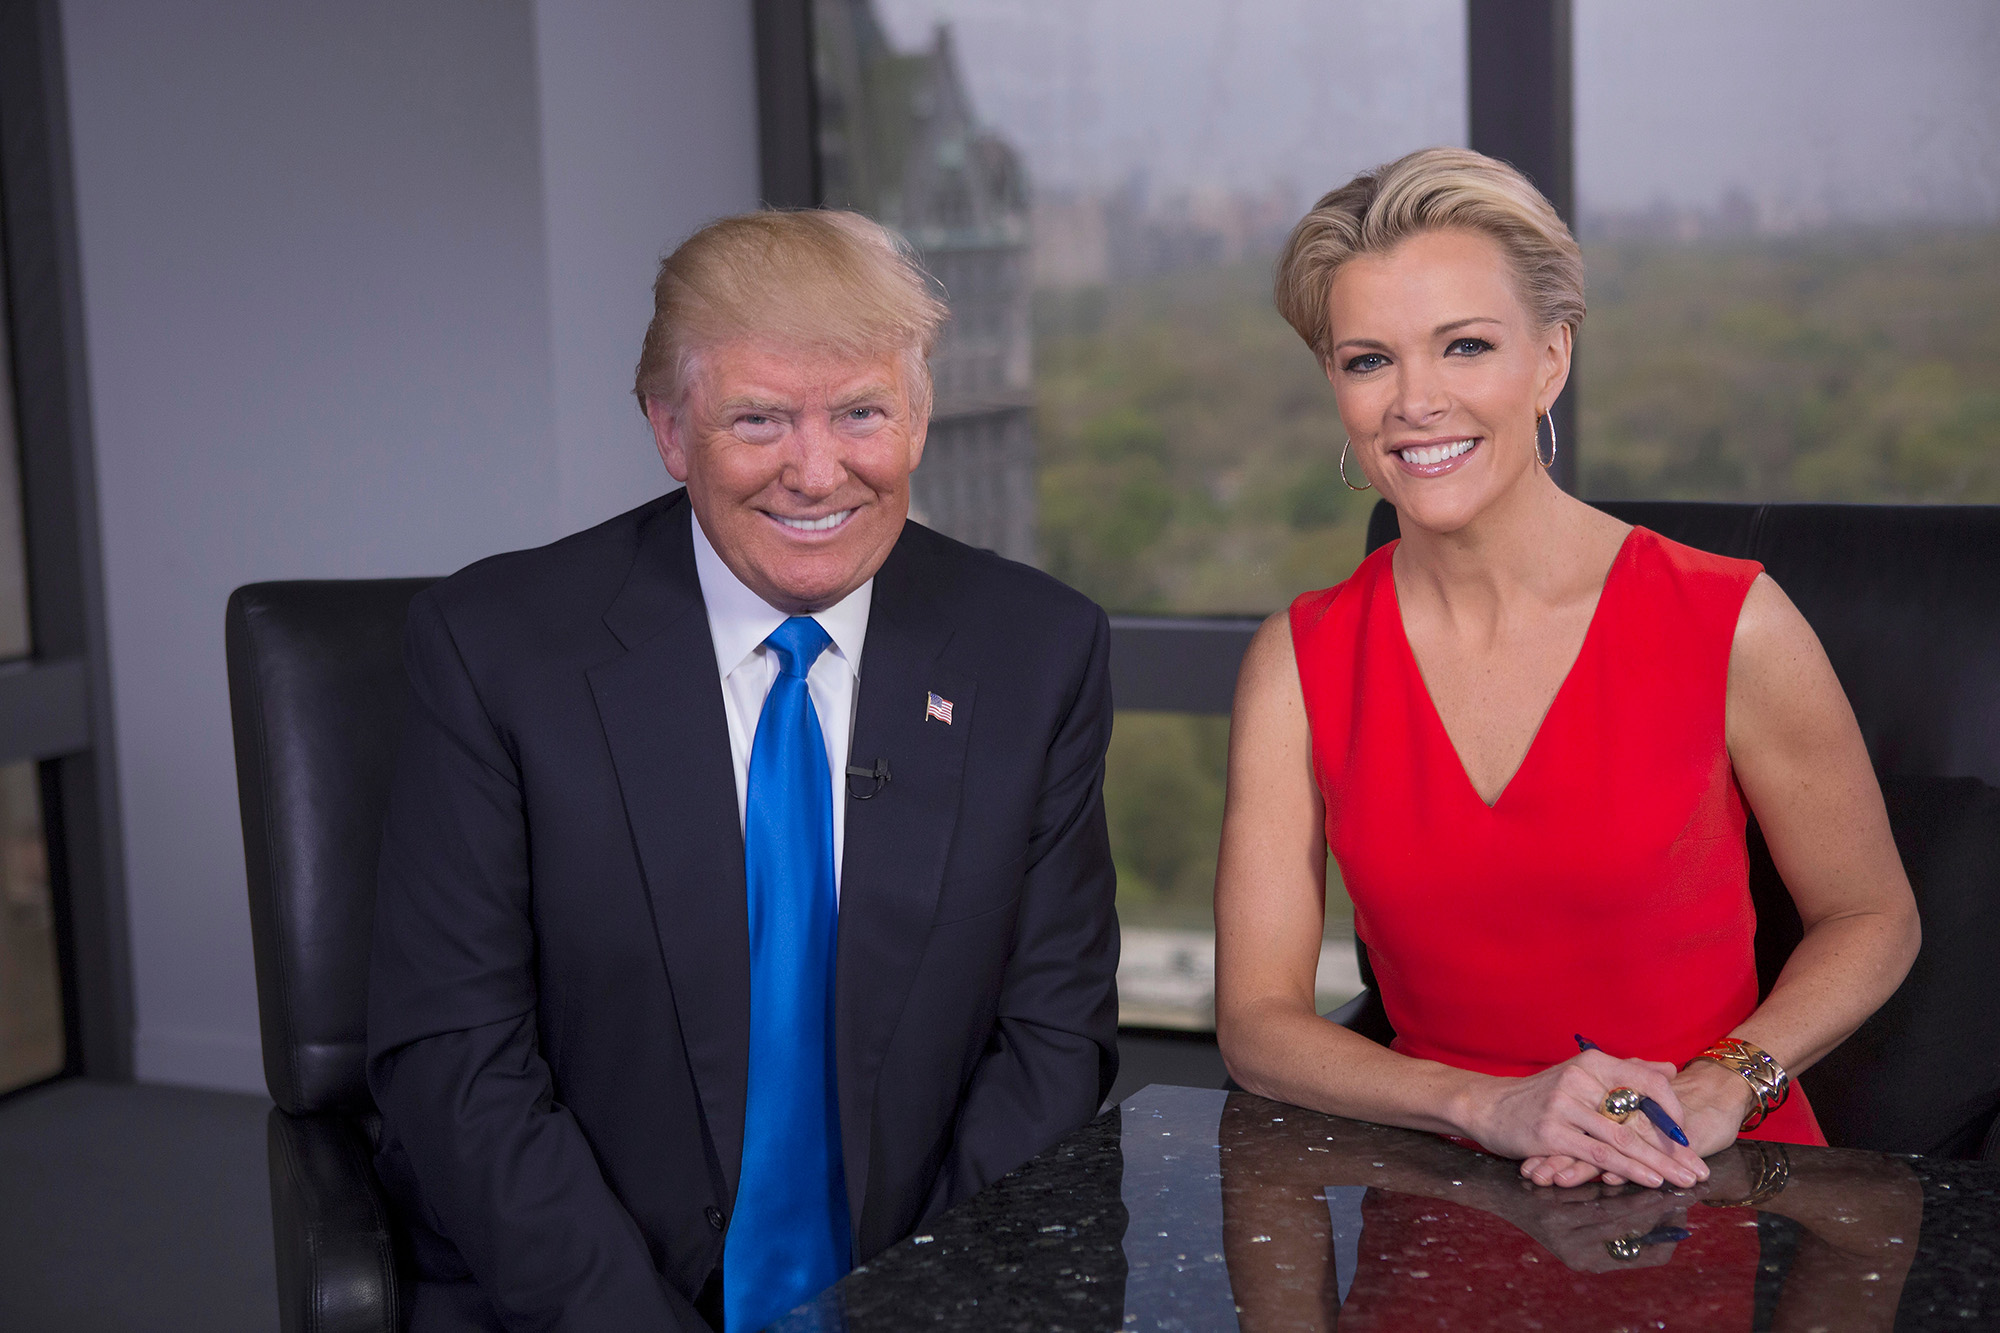 Megyn Kelly (R) and Donald Trump (L) during the FOX special "MEGYN KELLY presents" airing Tuesday, May 17 (8:00-9:01 PM ET/PT) on FOX. (Photo by Eric Liebowitz/FOX via Getty Images) (FOX&mdash;FOX via Getty Images)